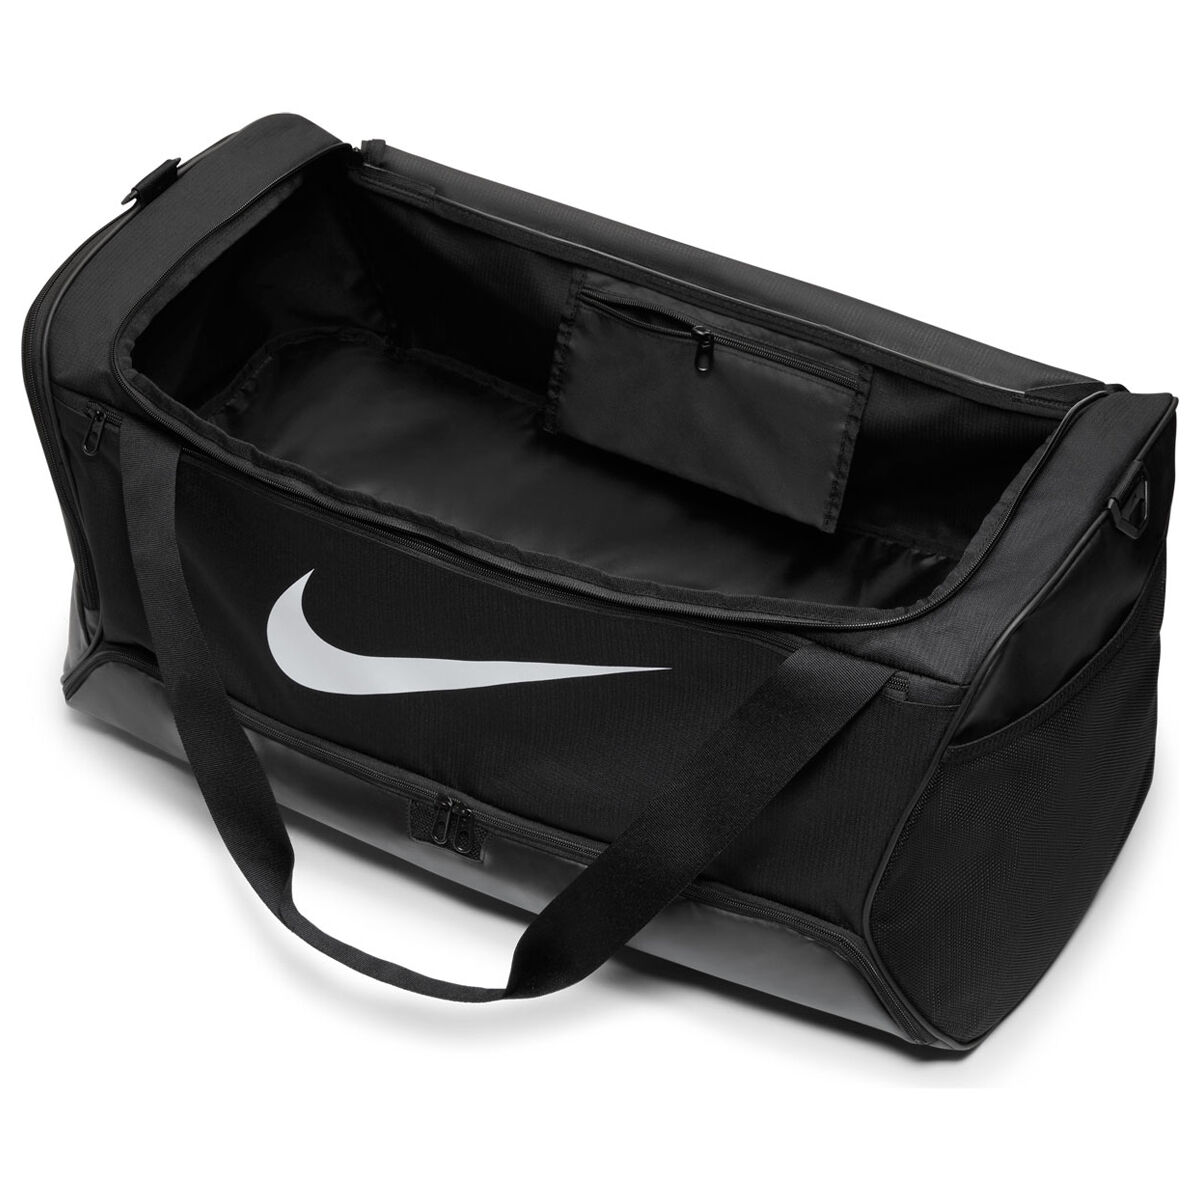 Promotional Duffle Bags & Travel Bags | Promotion Products